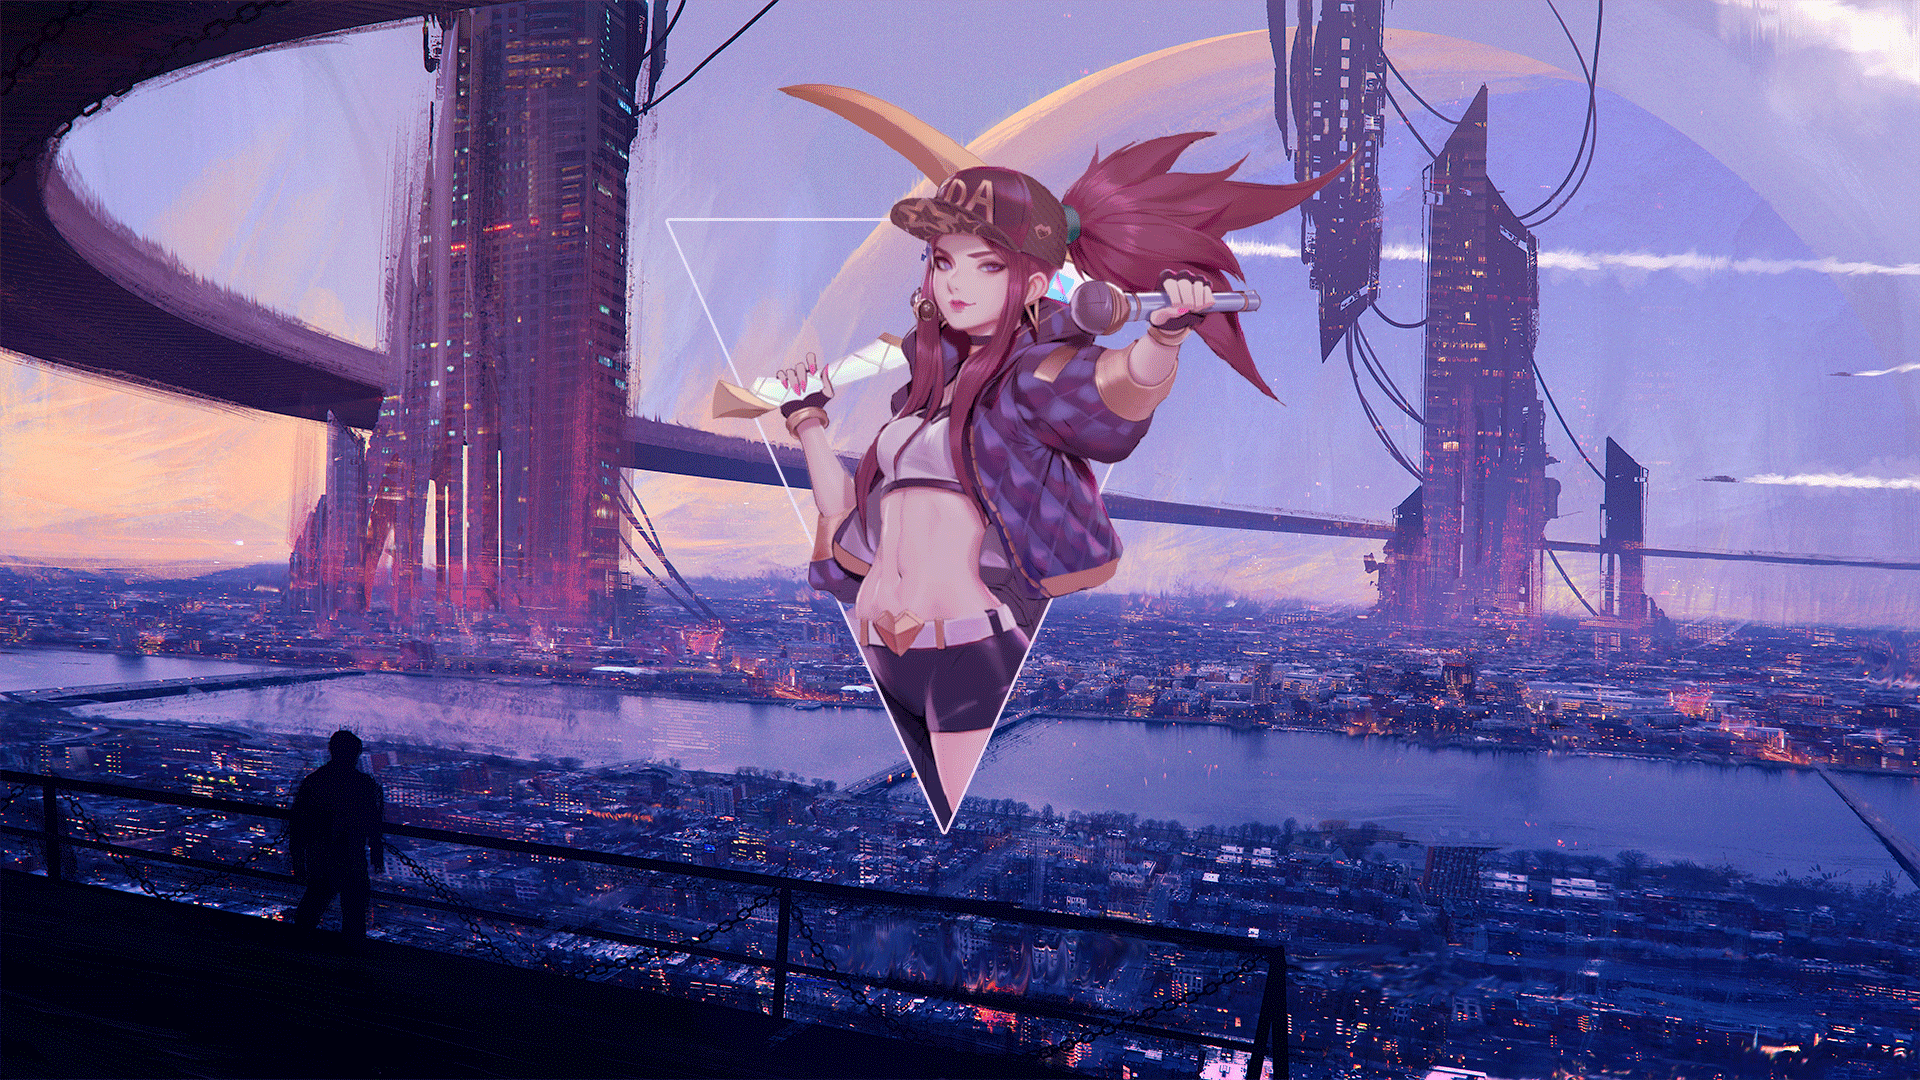 Anime 1920x1080 anime anime girls Akali (League of Legends) League of Legends digital art picture-in-picture landscape cityscape